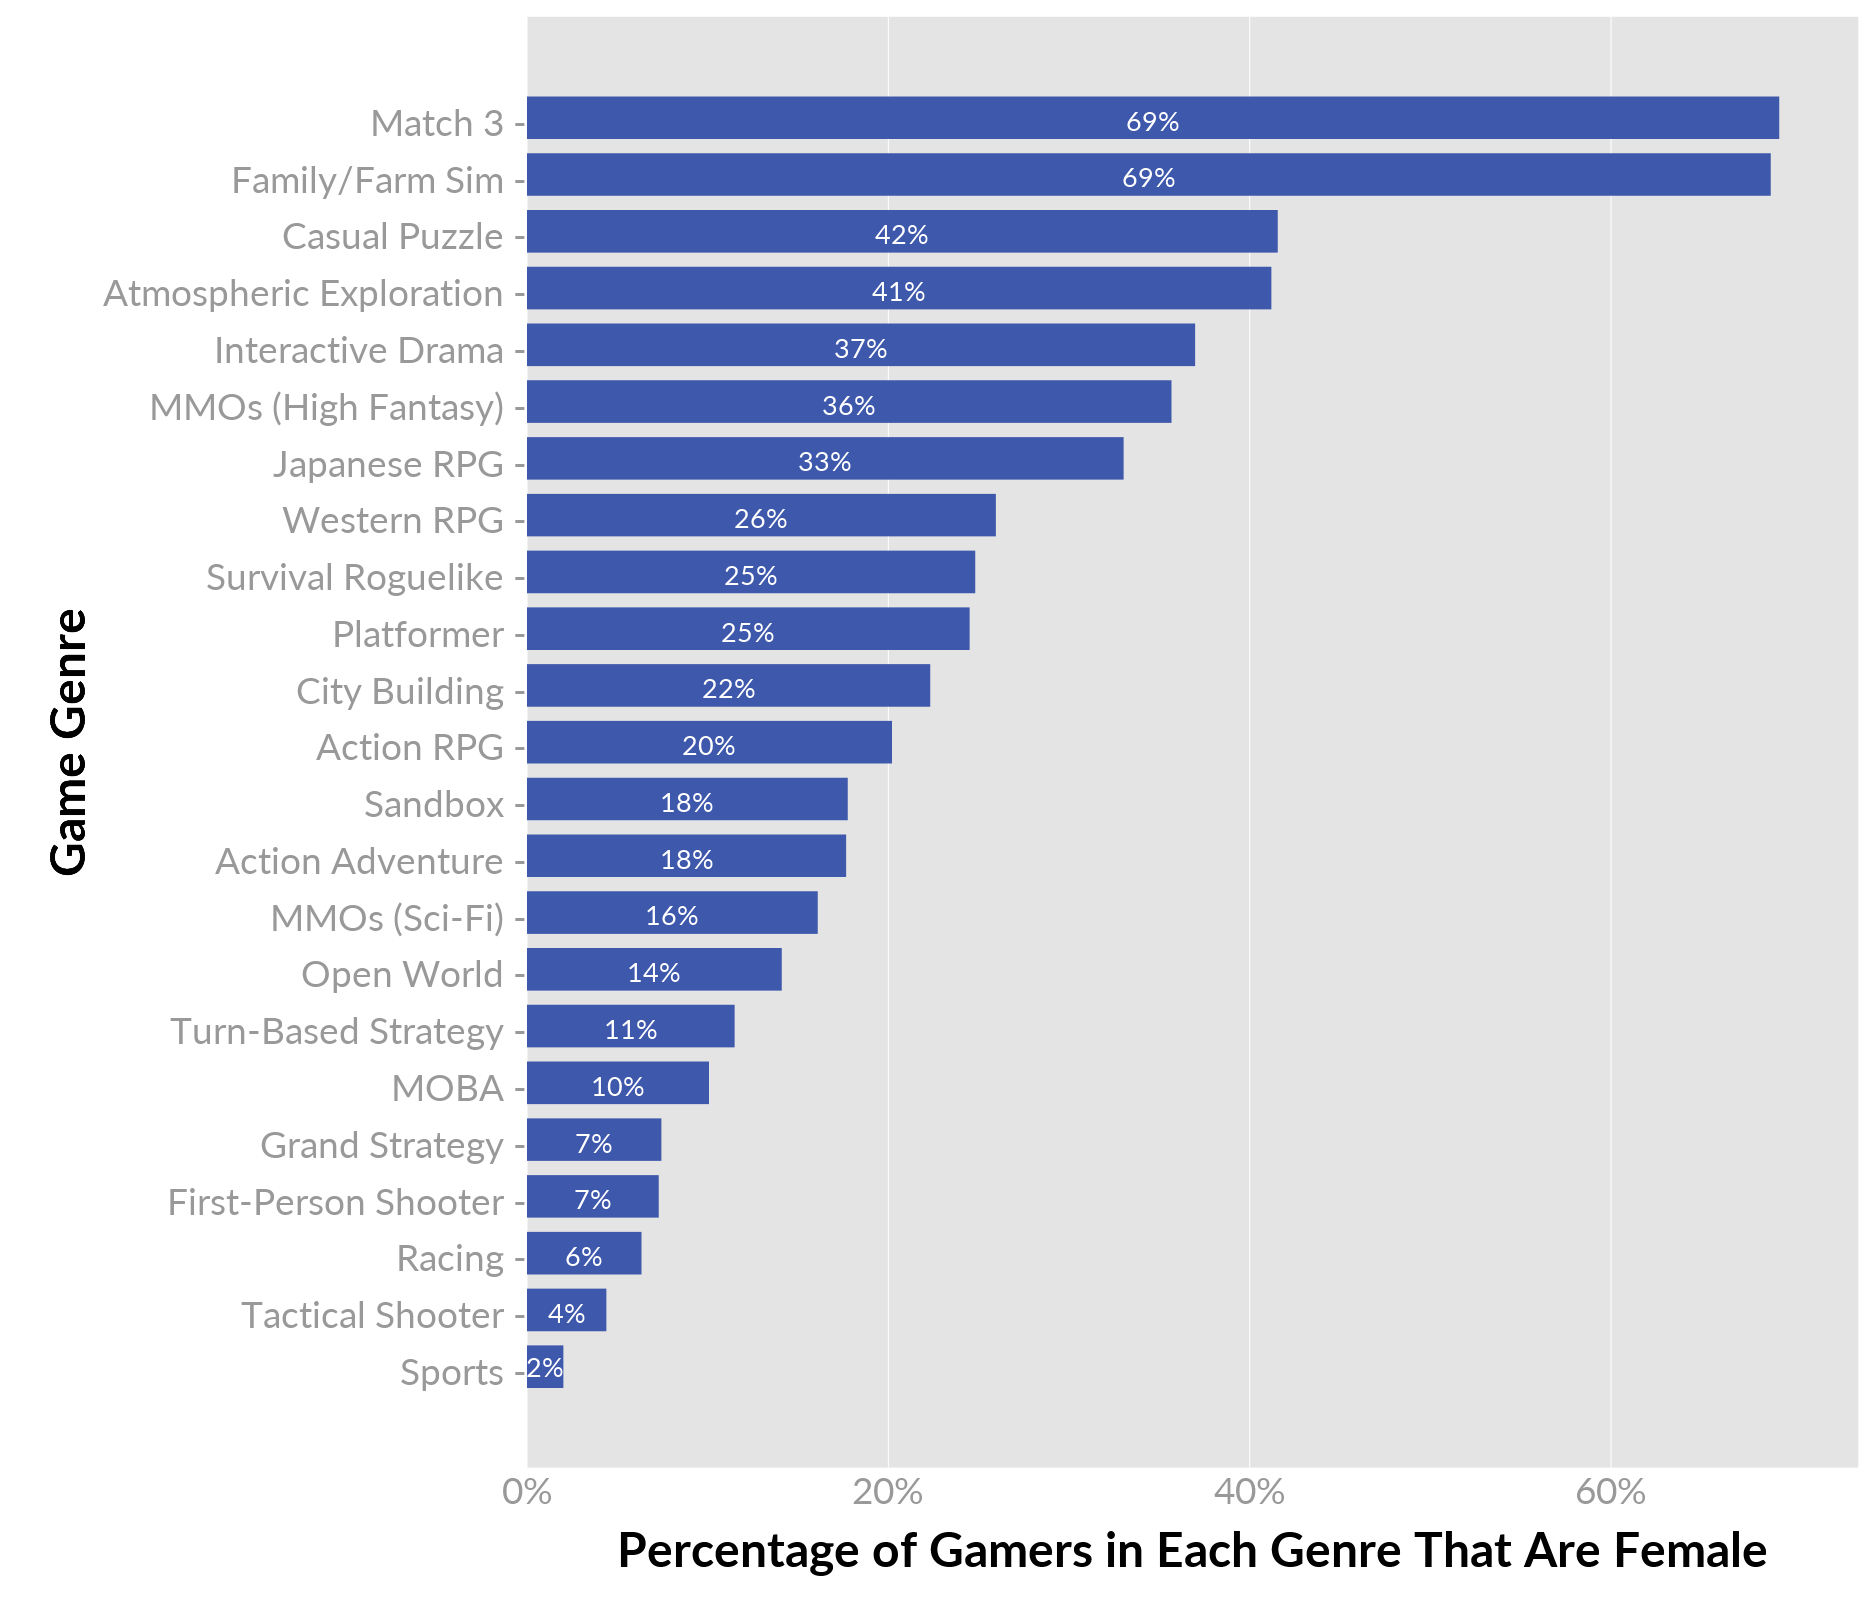 Beyond 50 50 Breaking Down The Percentage Of Female Gamers By Genre